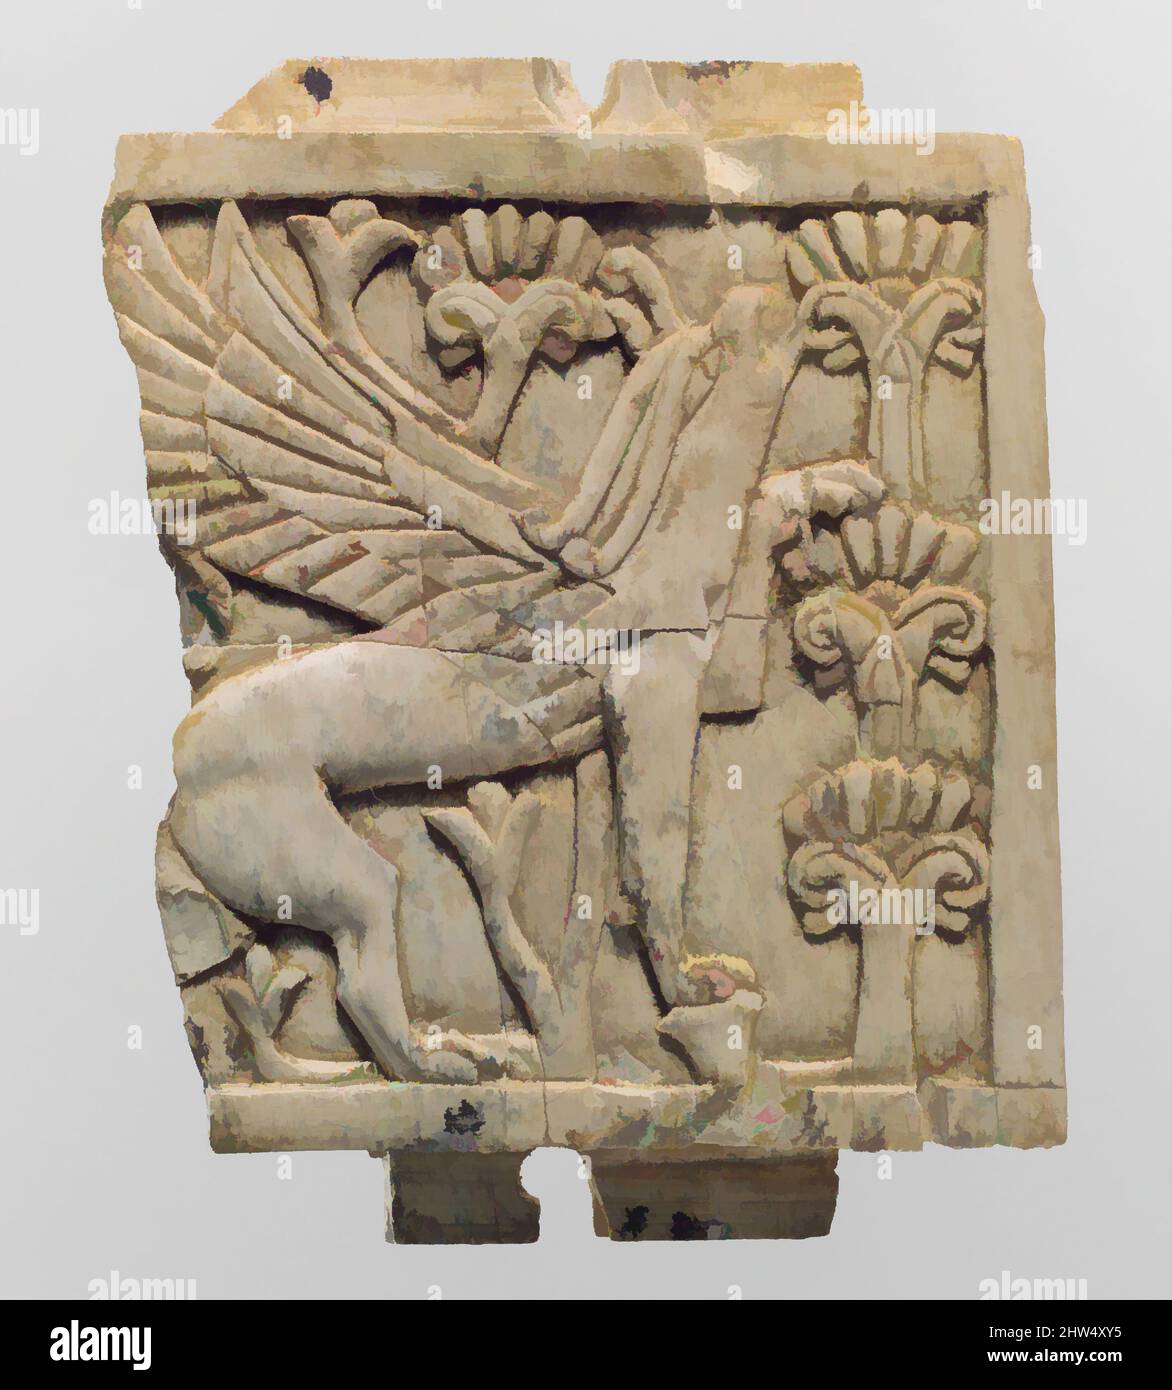 Art inspired by Furniture plaque carved in relief with a griffin in a floral landscape, Neo-Assyrian, ca. 9th–8th century B.C., Mesopotamia, Nimrud (ancient Kalhu), Assyrian, Ivory, H. 3 1/16 x W. 2 3/8 x Th. 3/8 in. (7.8 x 6.1 x 1 cm), Ivory/Bone-Reliefs-Inscribed, A griffin, a hybrid, Classic works modernized by Artotop with a splash of modernity. Shapes, color and value, eye-catching visual impact on art. Emotions through freedom of artworks in a contemporary way. A timeless message pursuing a wildly creative new direction. Artists turning to the digital medium and creating the Artotop NFT Stock Photo